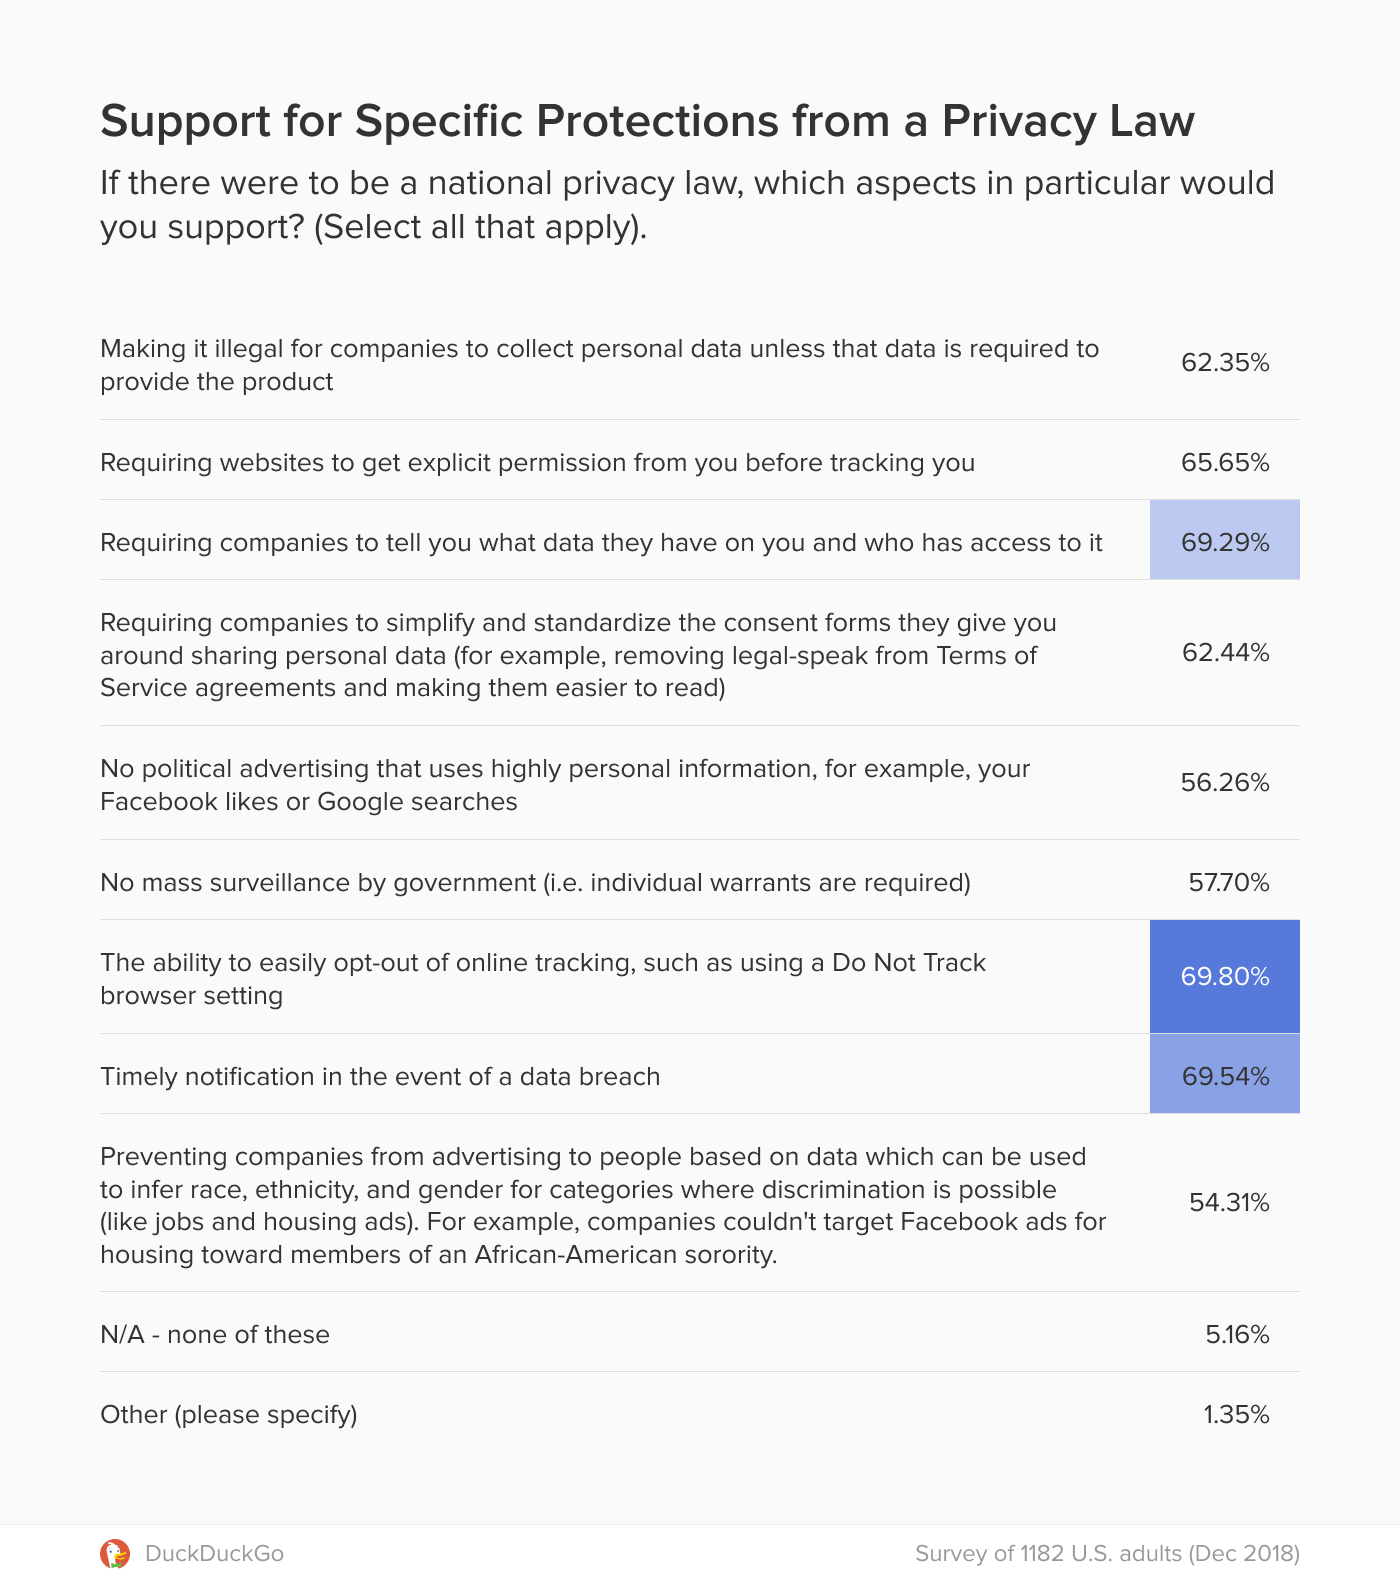 Chart showing support for different aspects of a potential national privacy law in the U.S.